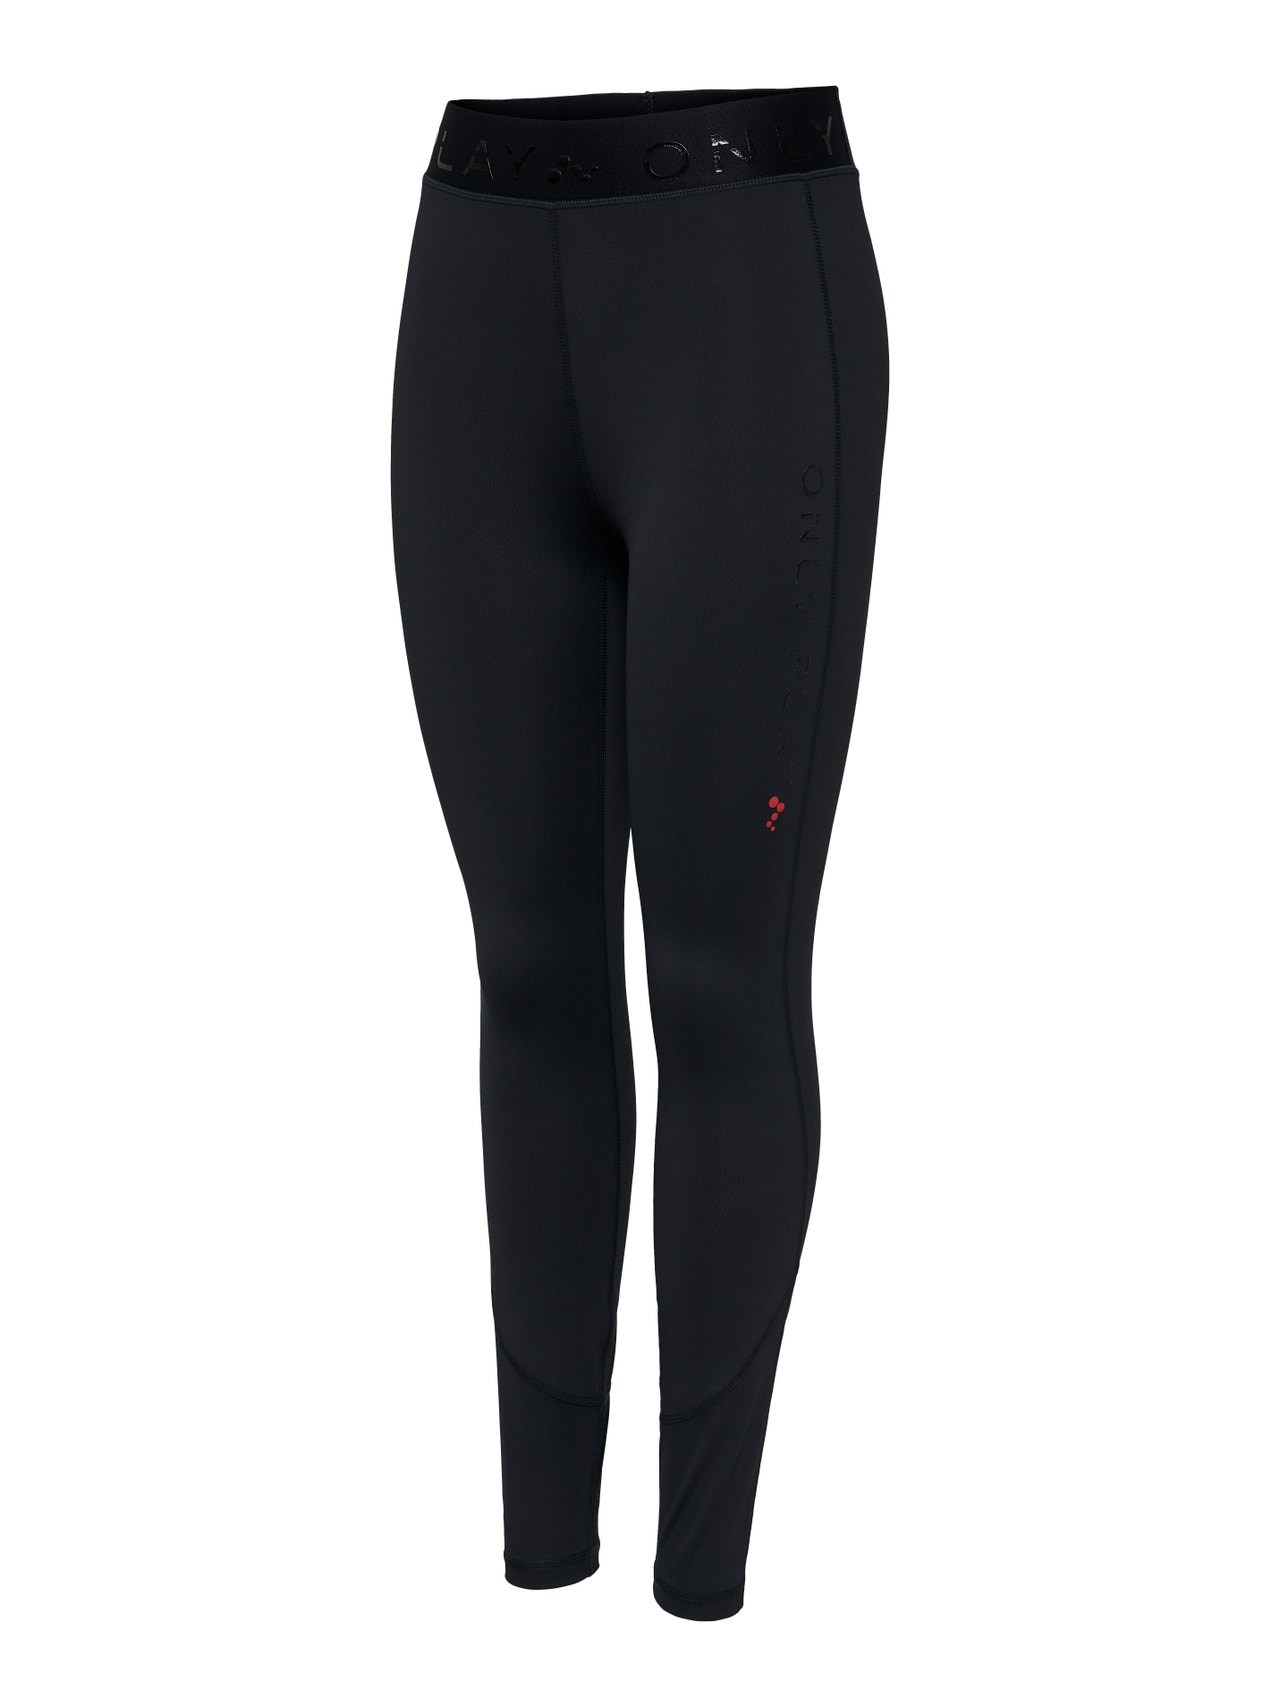 ONLY Tight Fit High waist Leggings -Black - 15190107